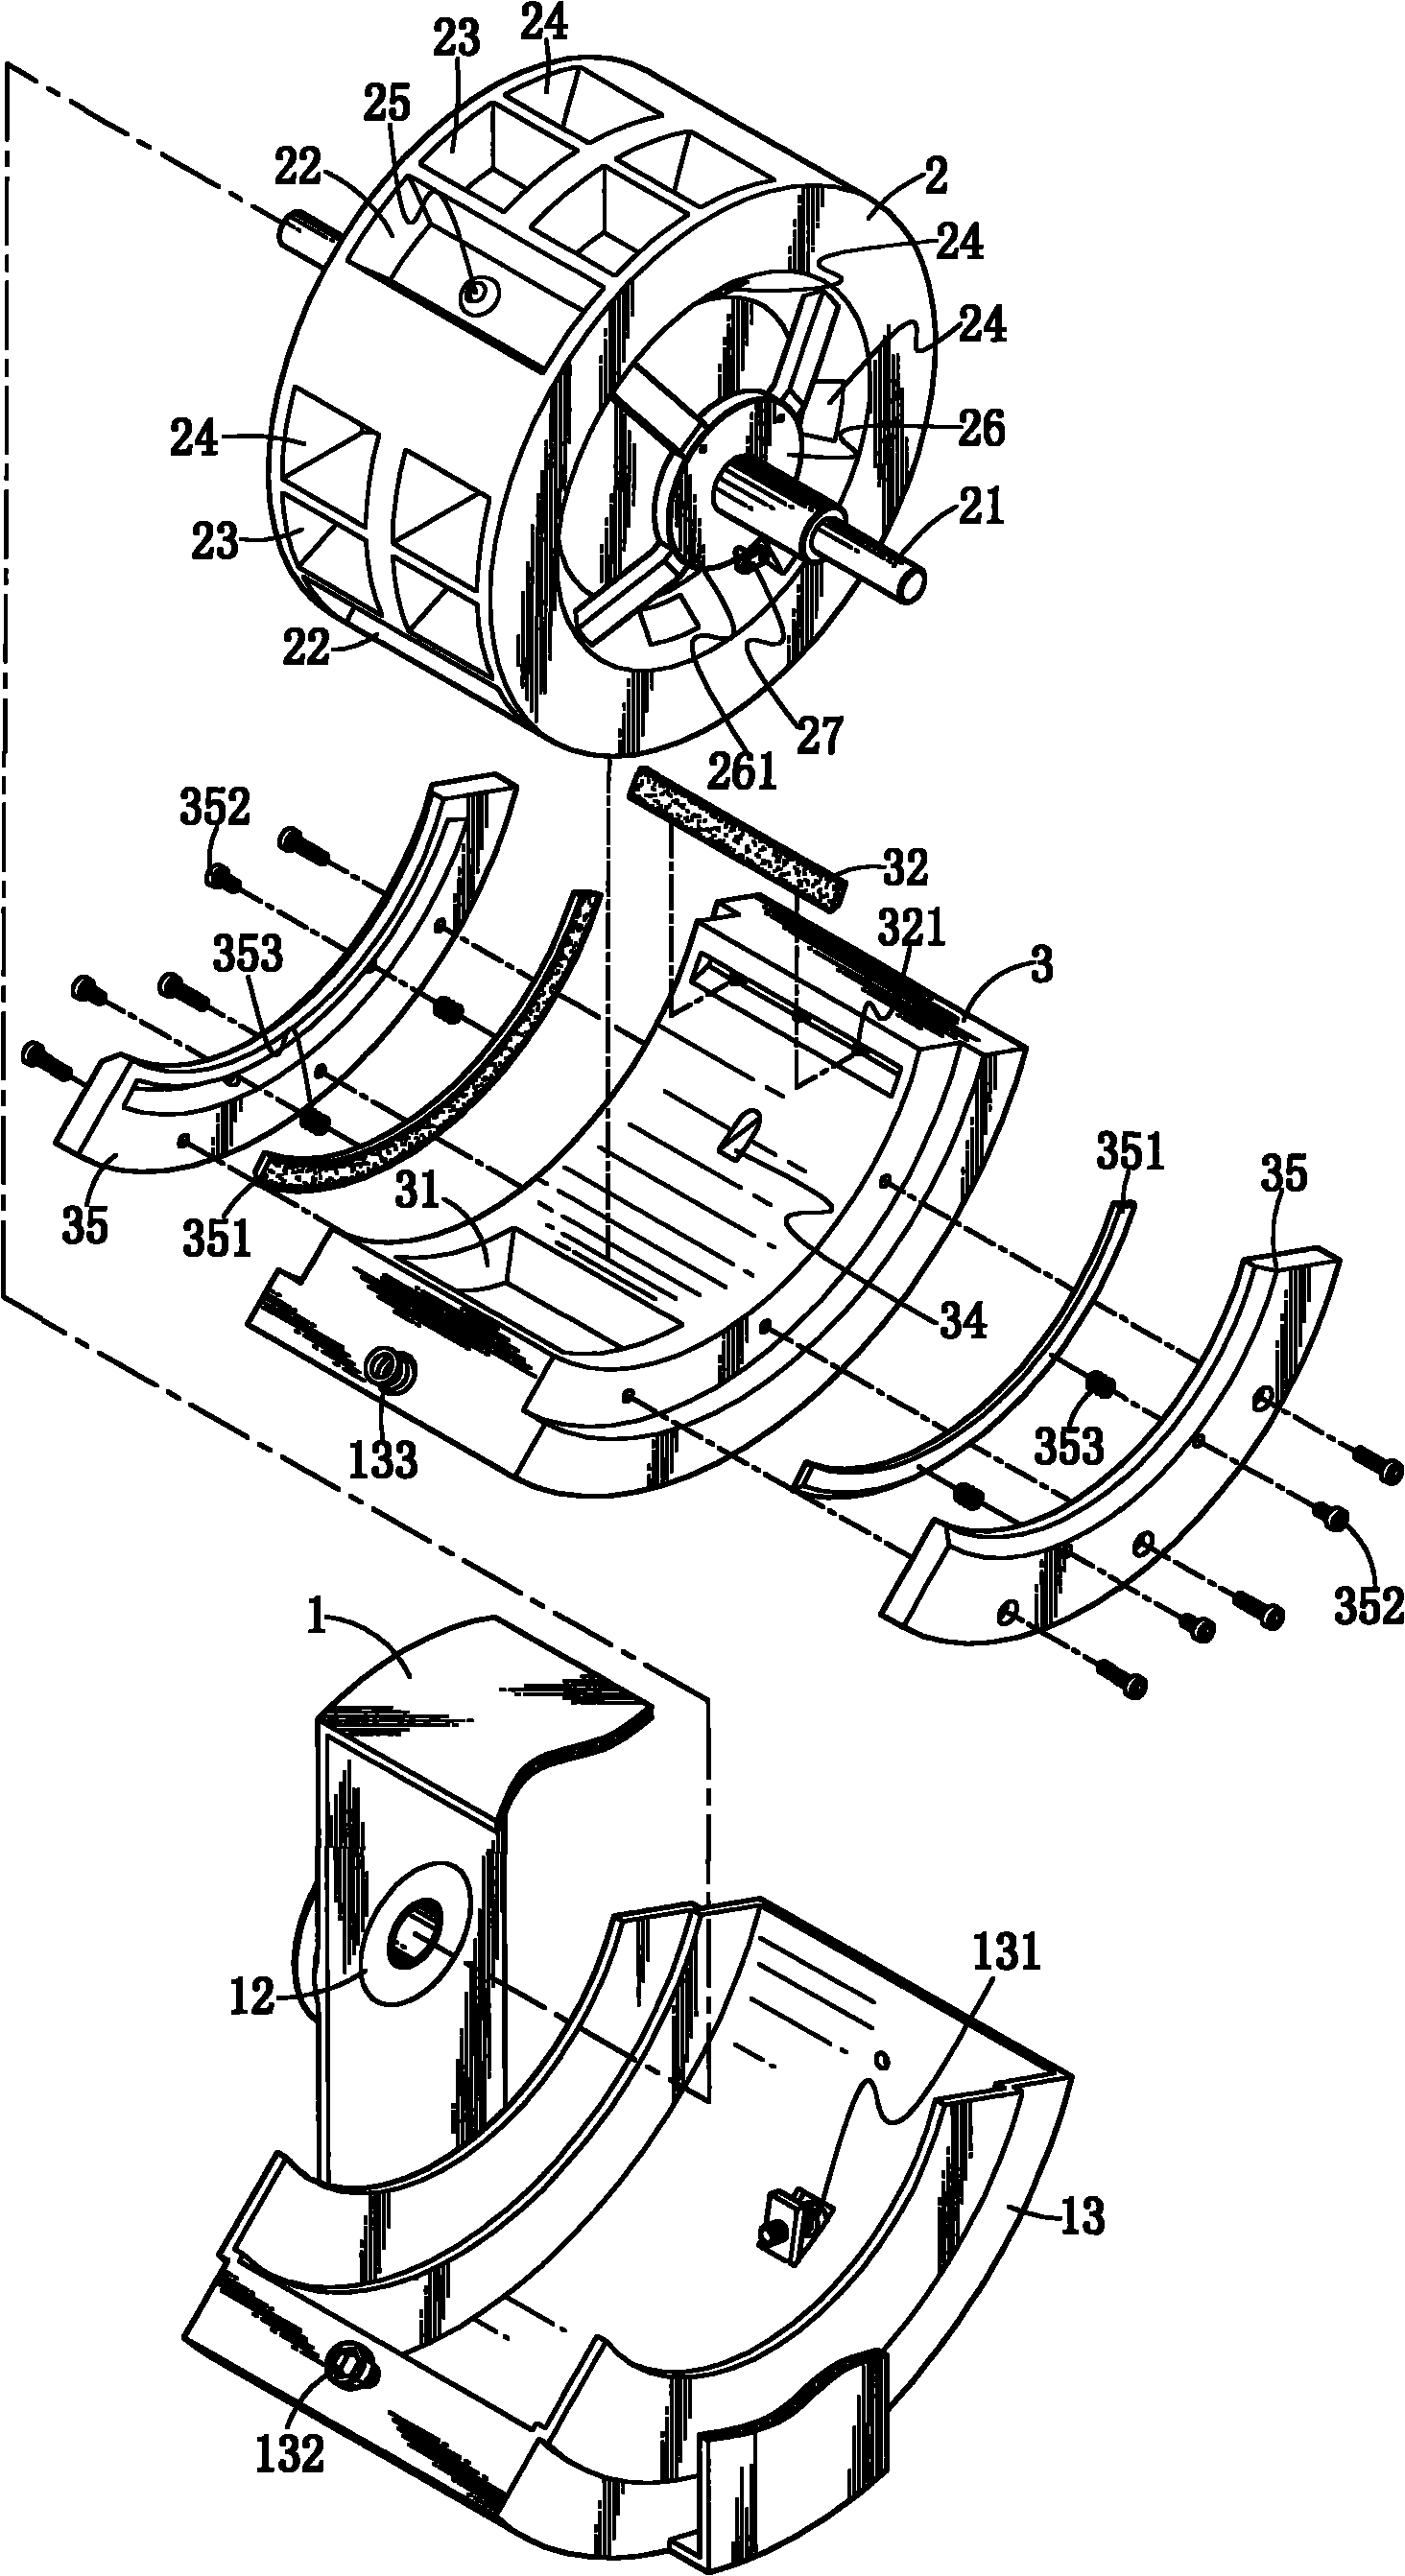 Improved structure of rotary engine